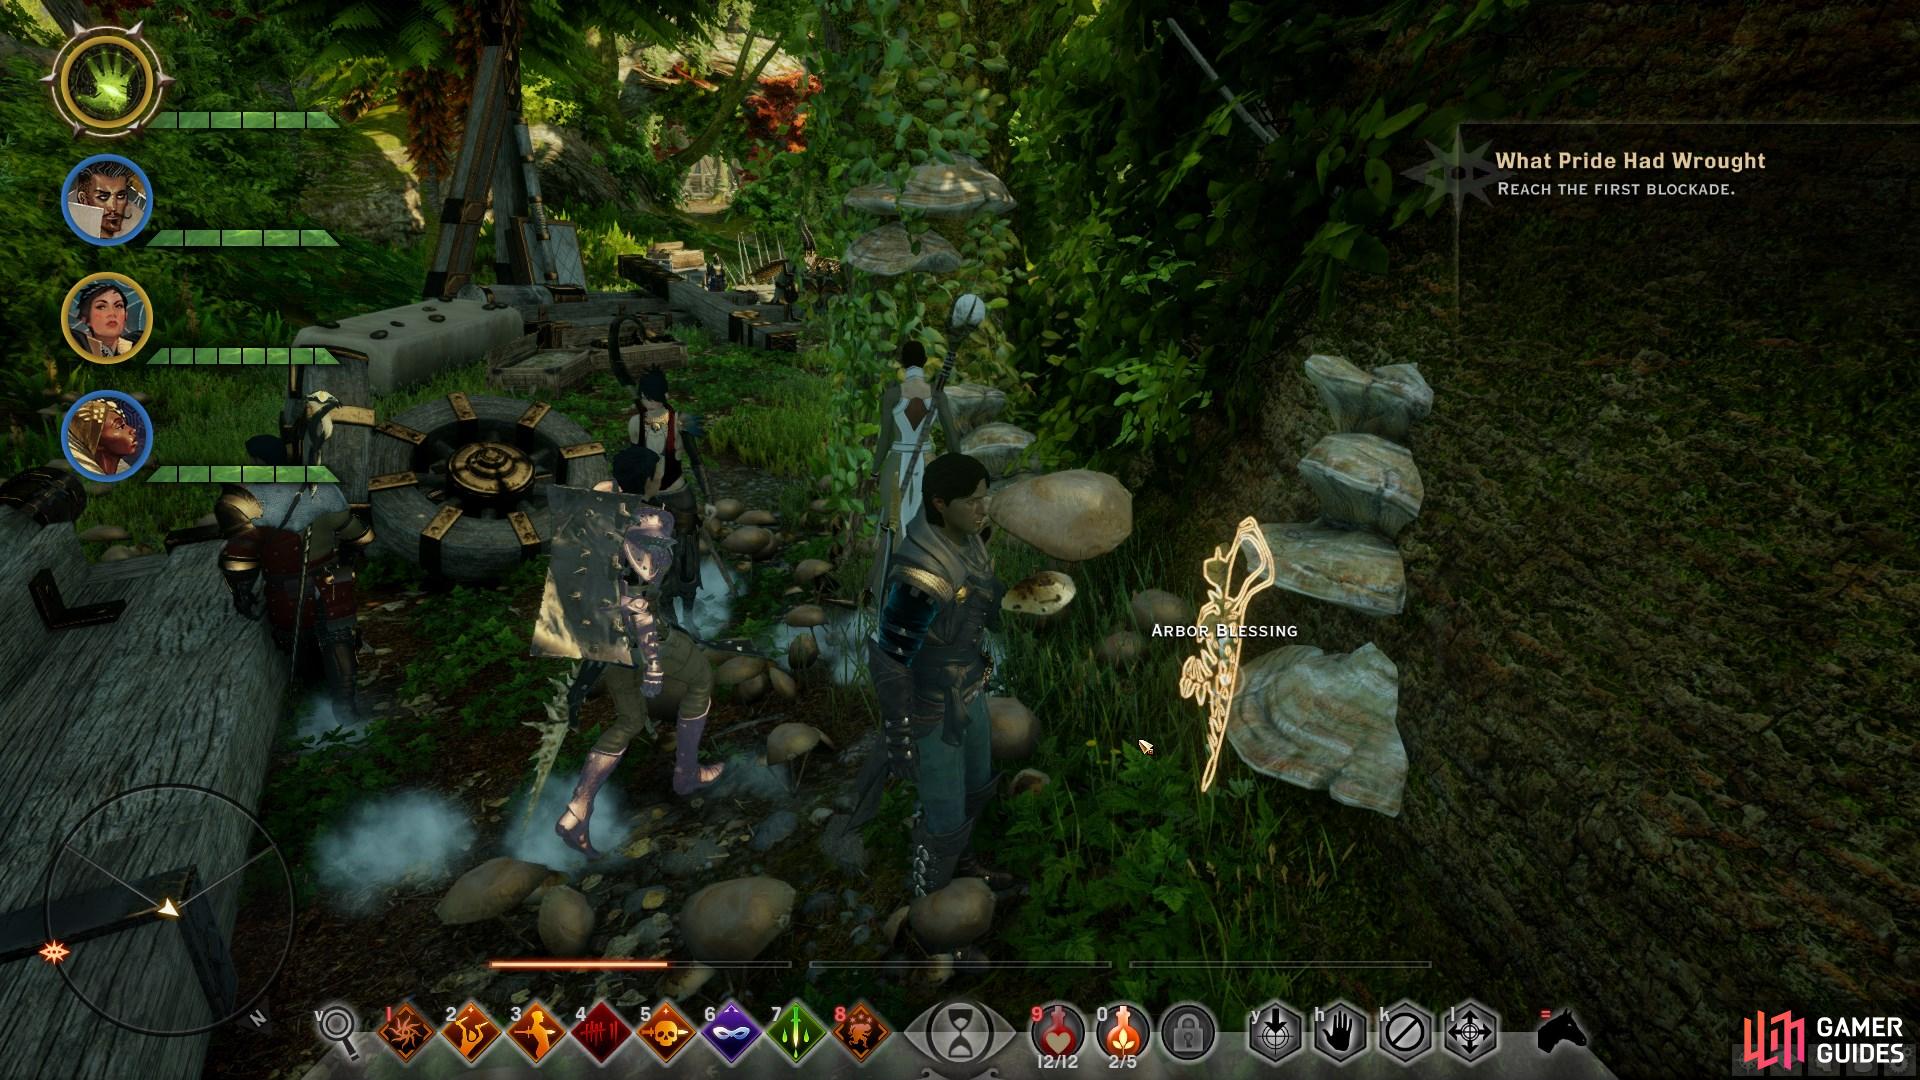 Looting Arbor Blessing will allow you to acquire their seeds, which can later be planted at Skyhold.